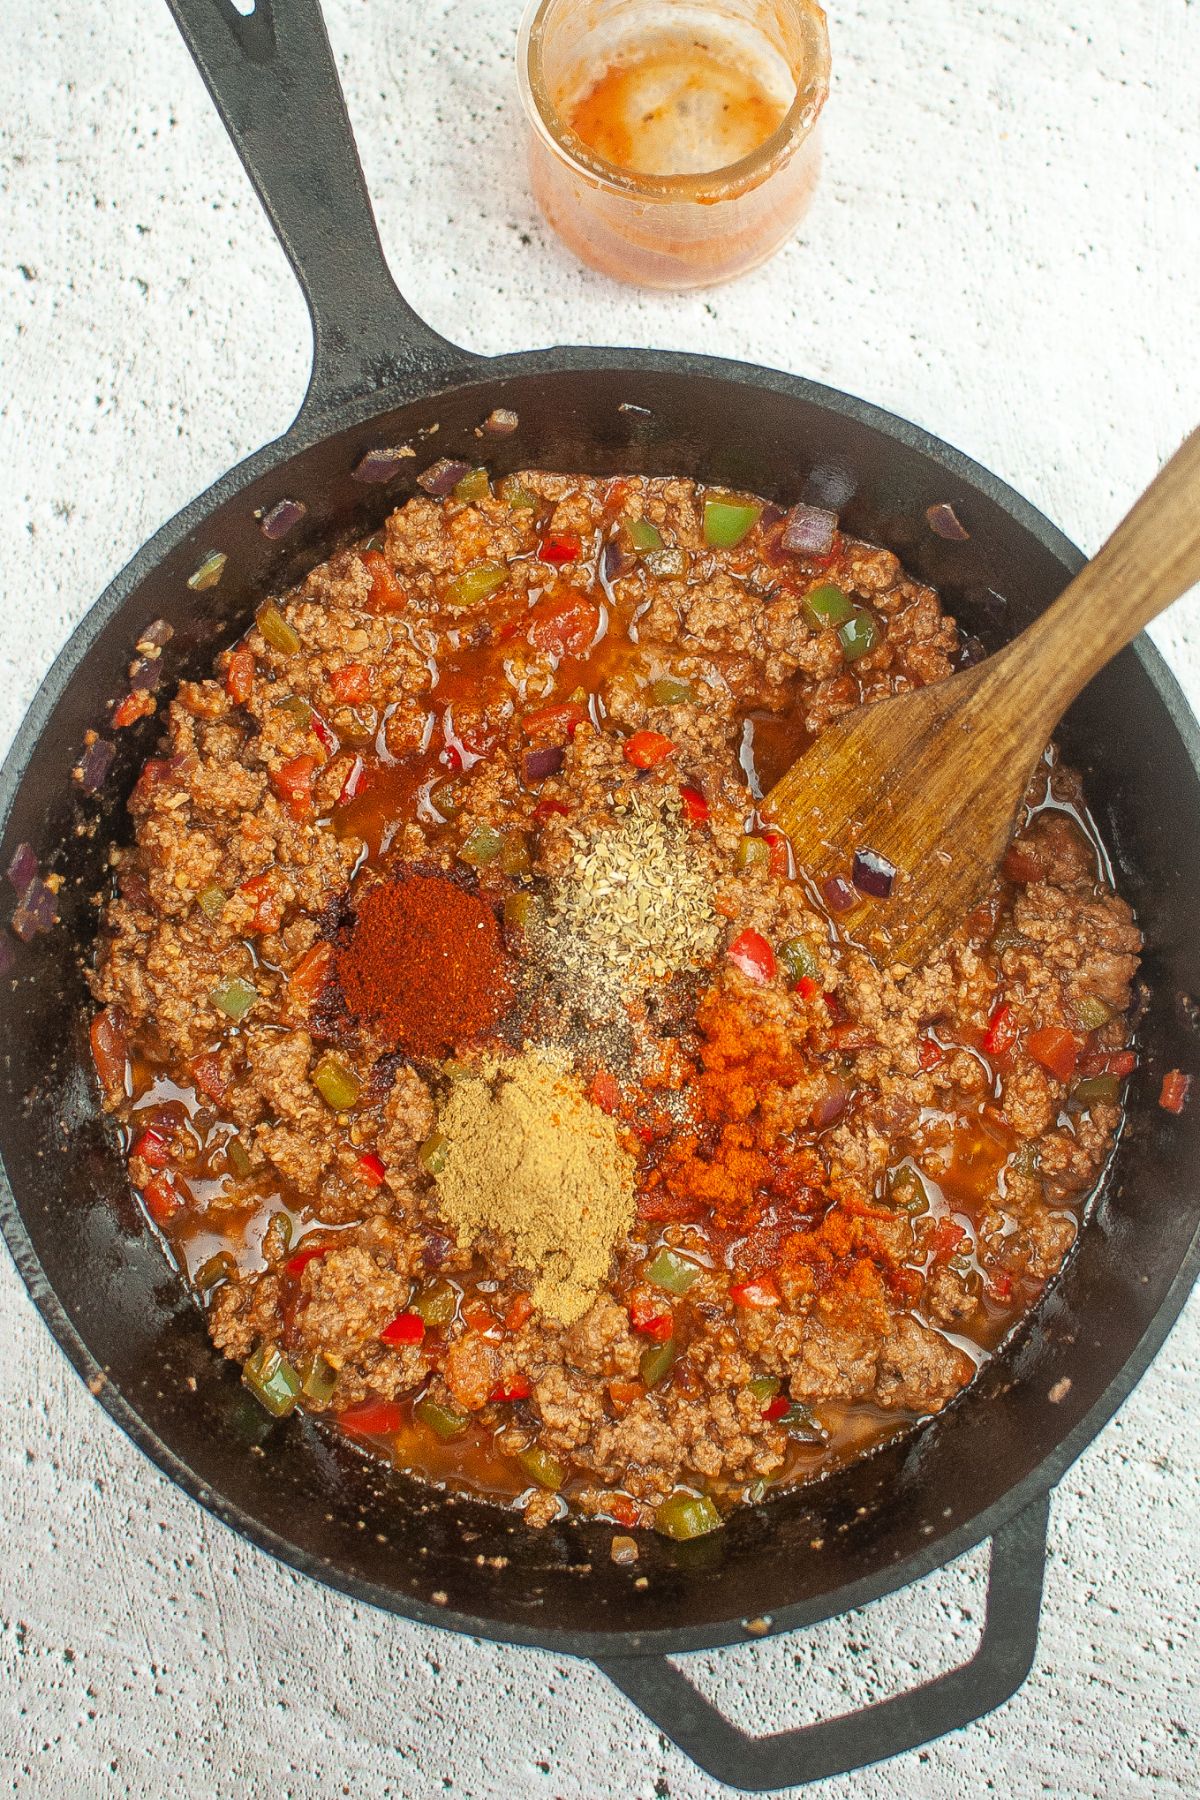 seasonings be added to a skillet of chili